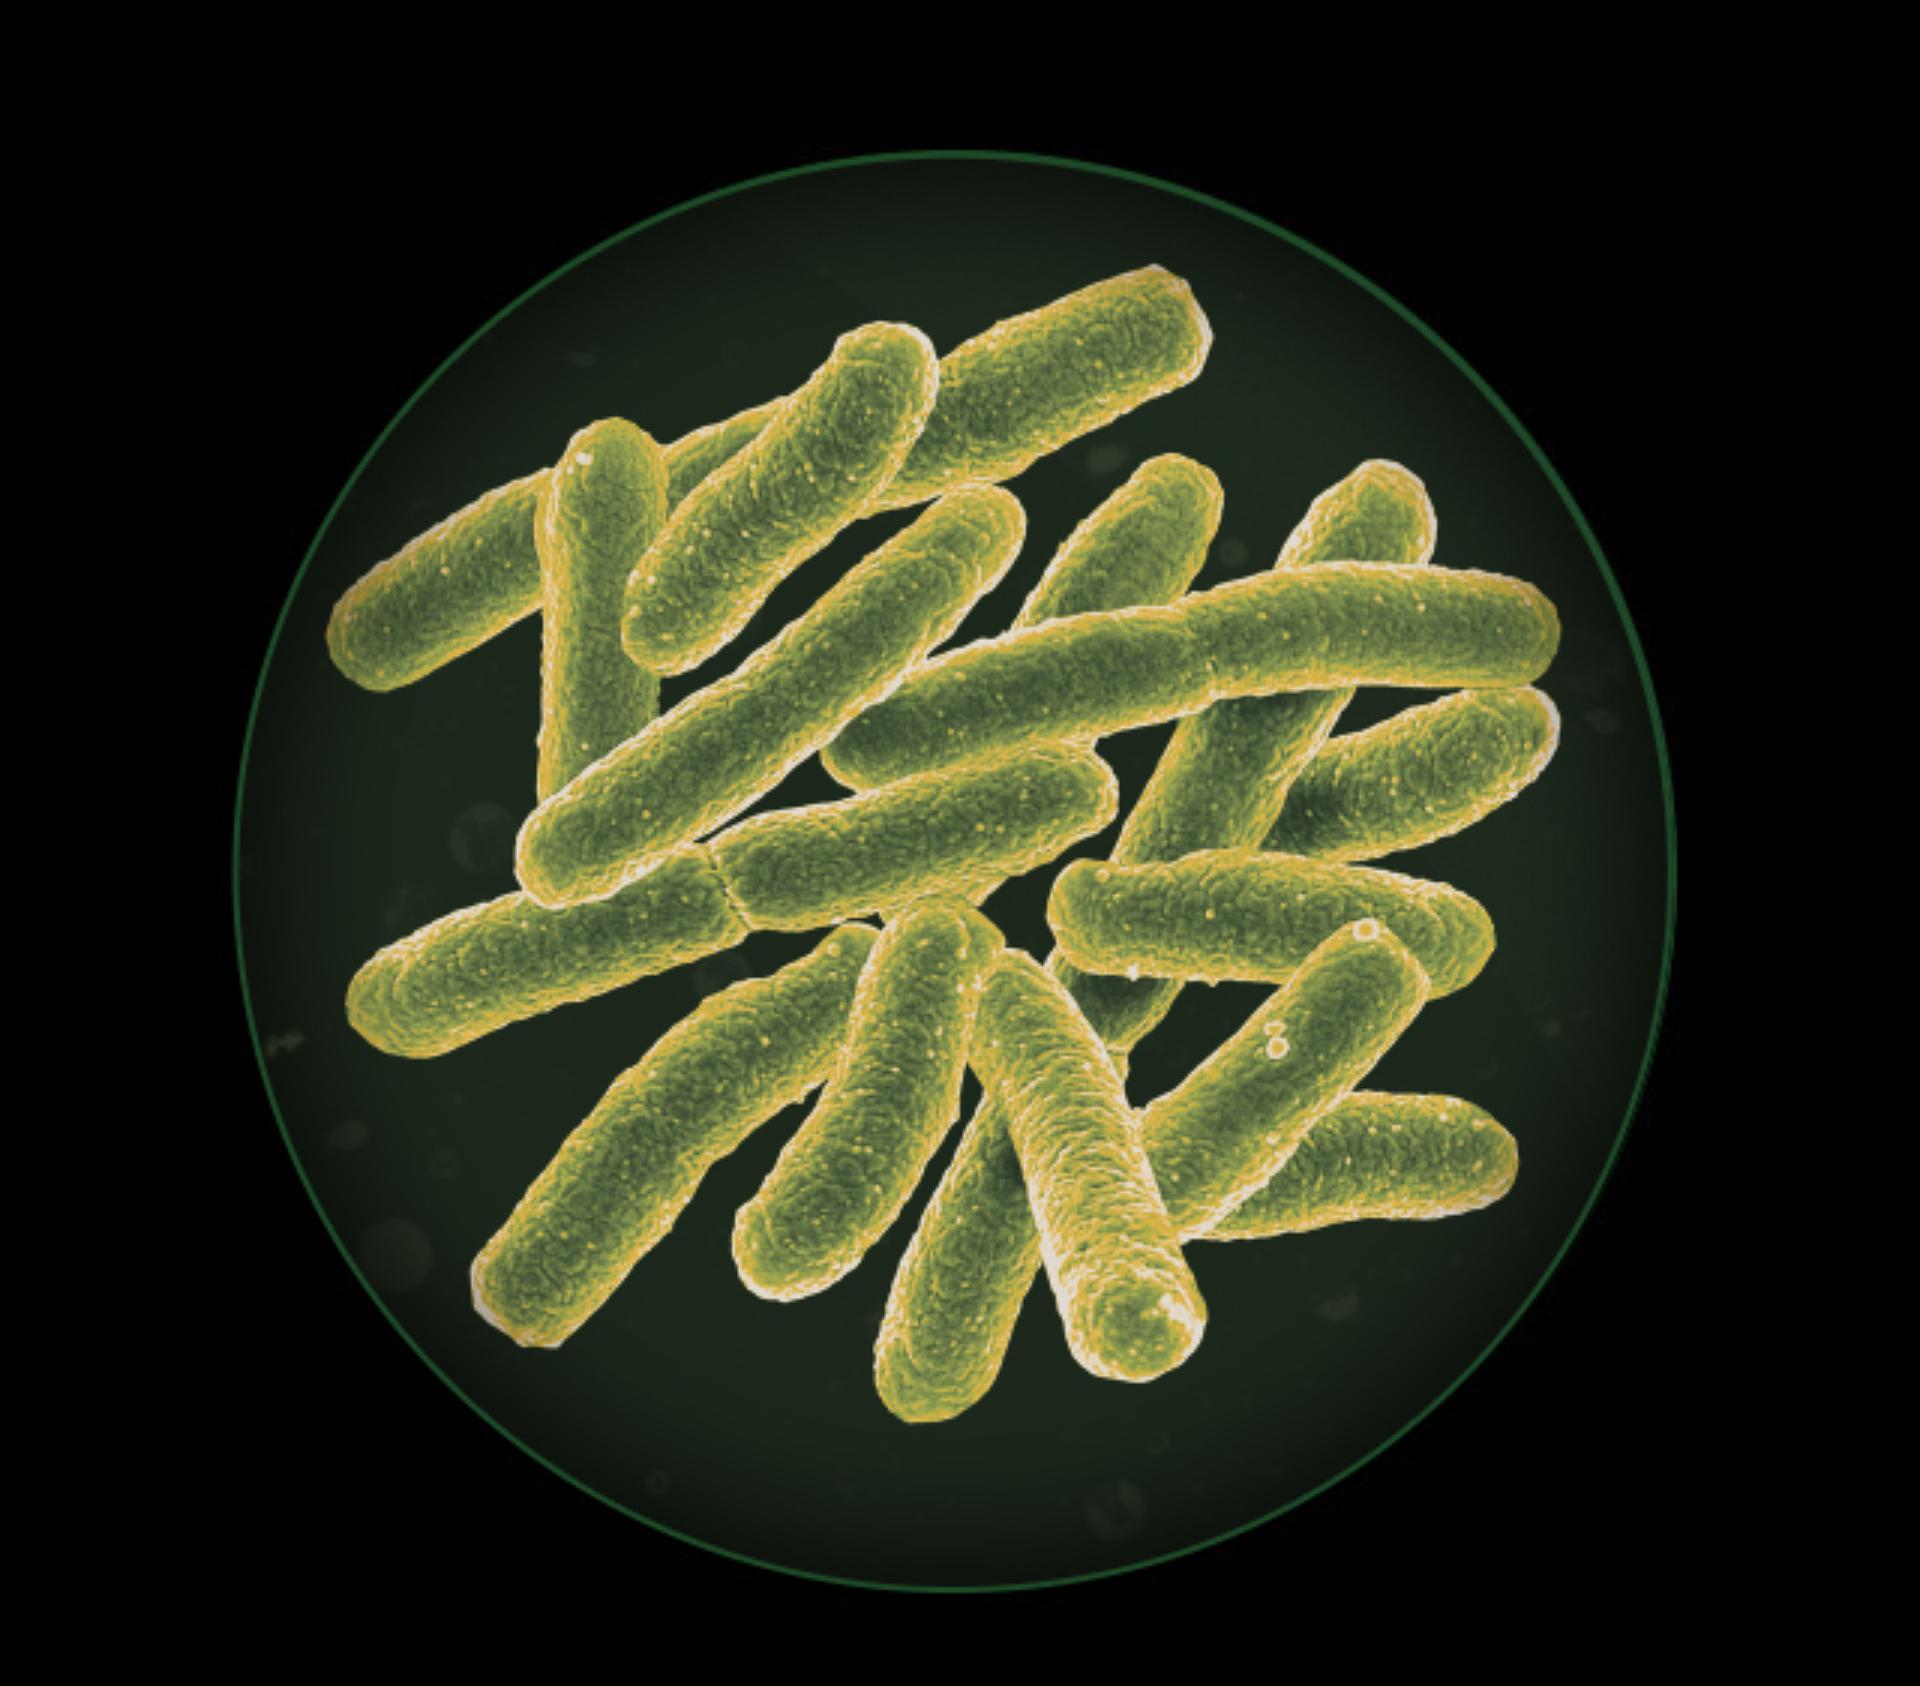 Bacteria and mold diagram